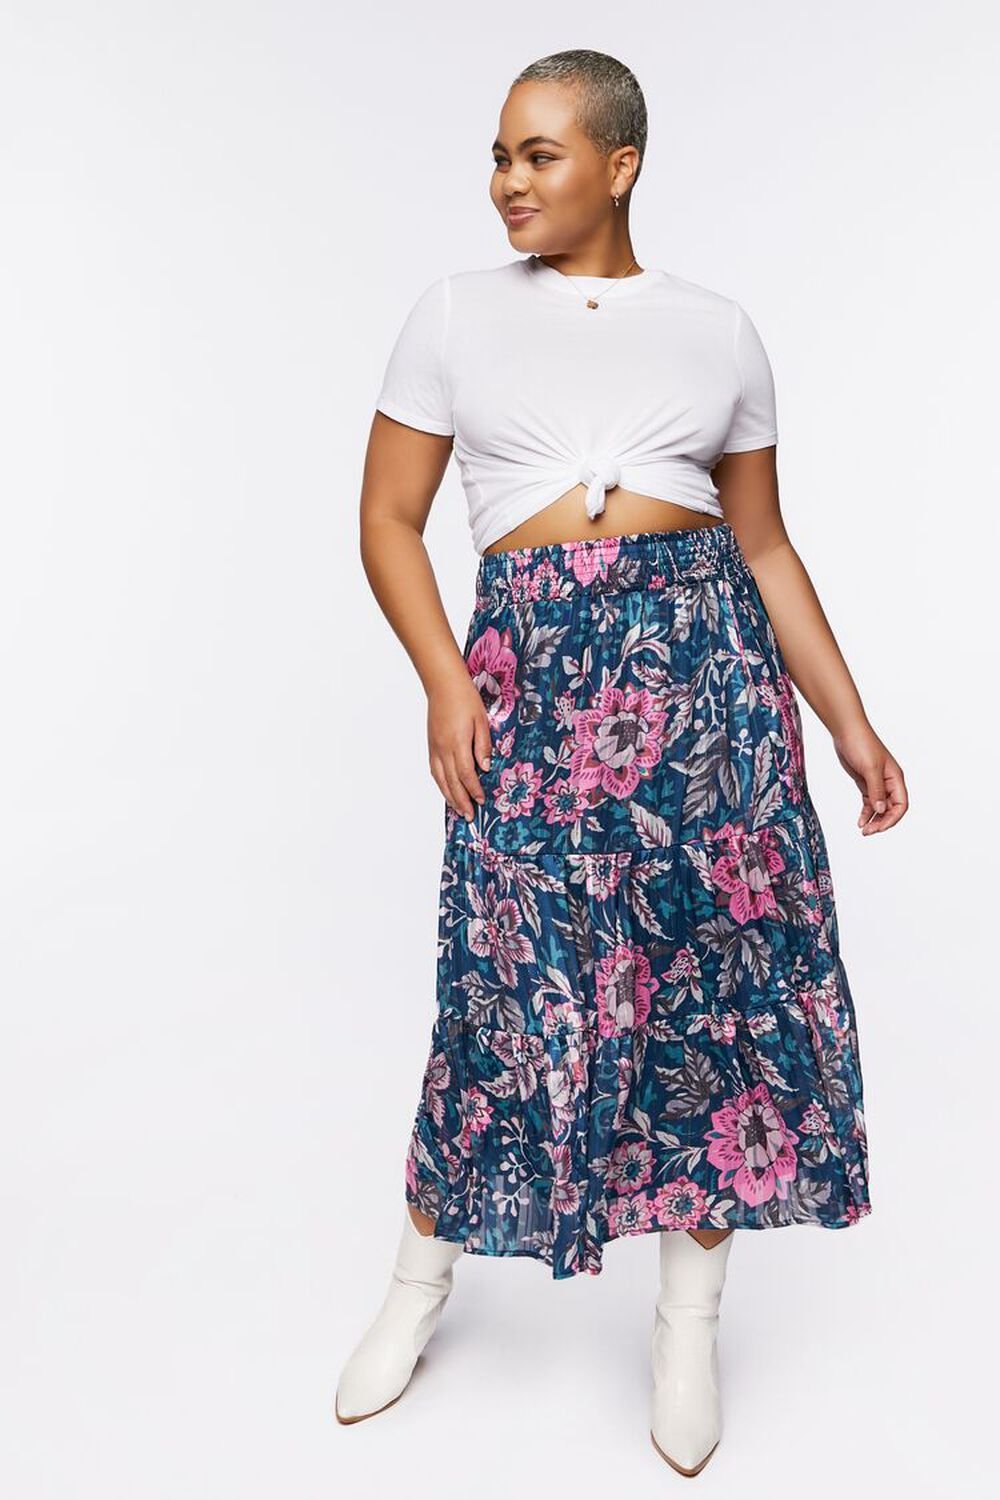 BLUE/MULTI Plus Size Floral Print Tiered Maxi Skirt, image 1